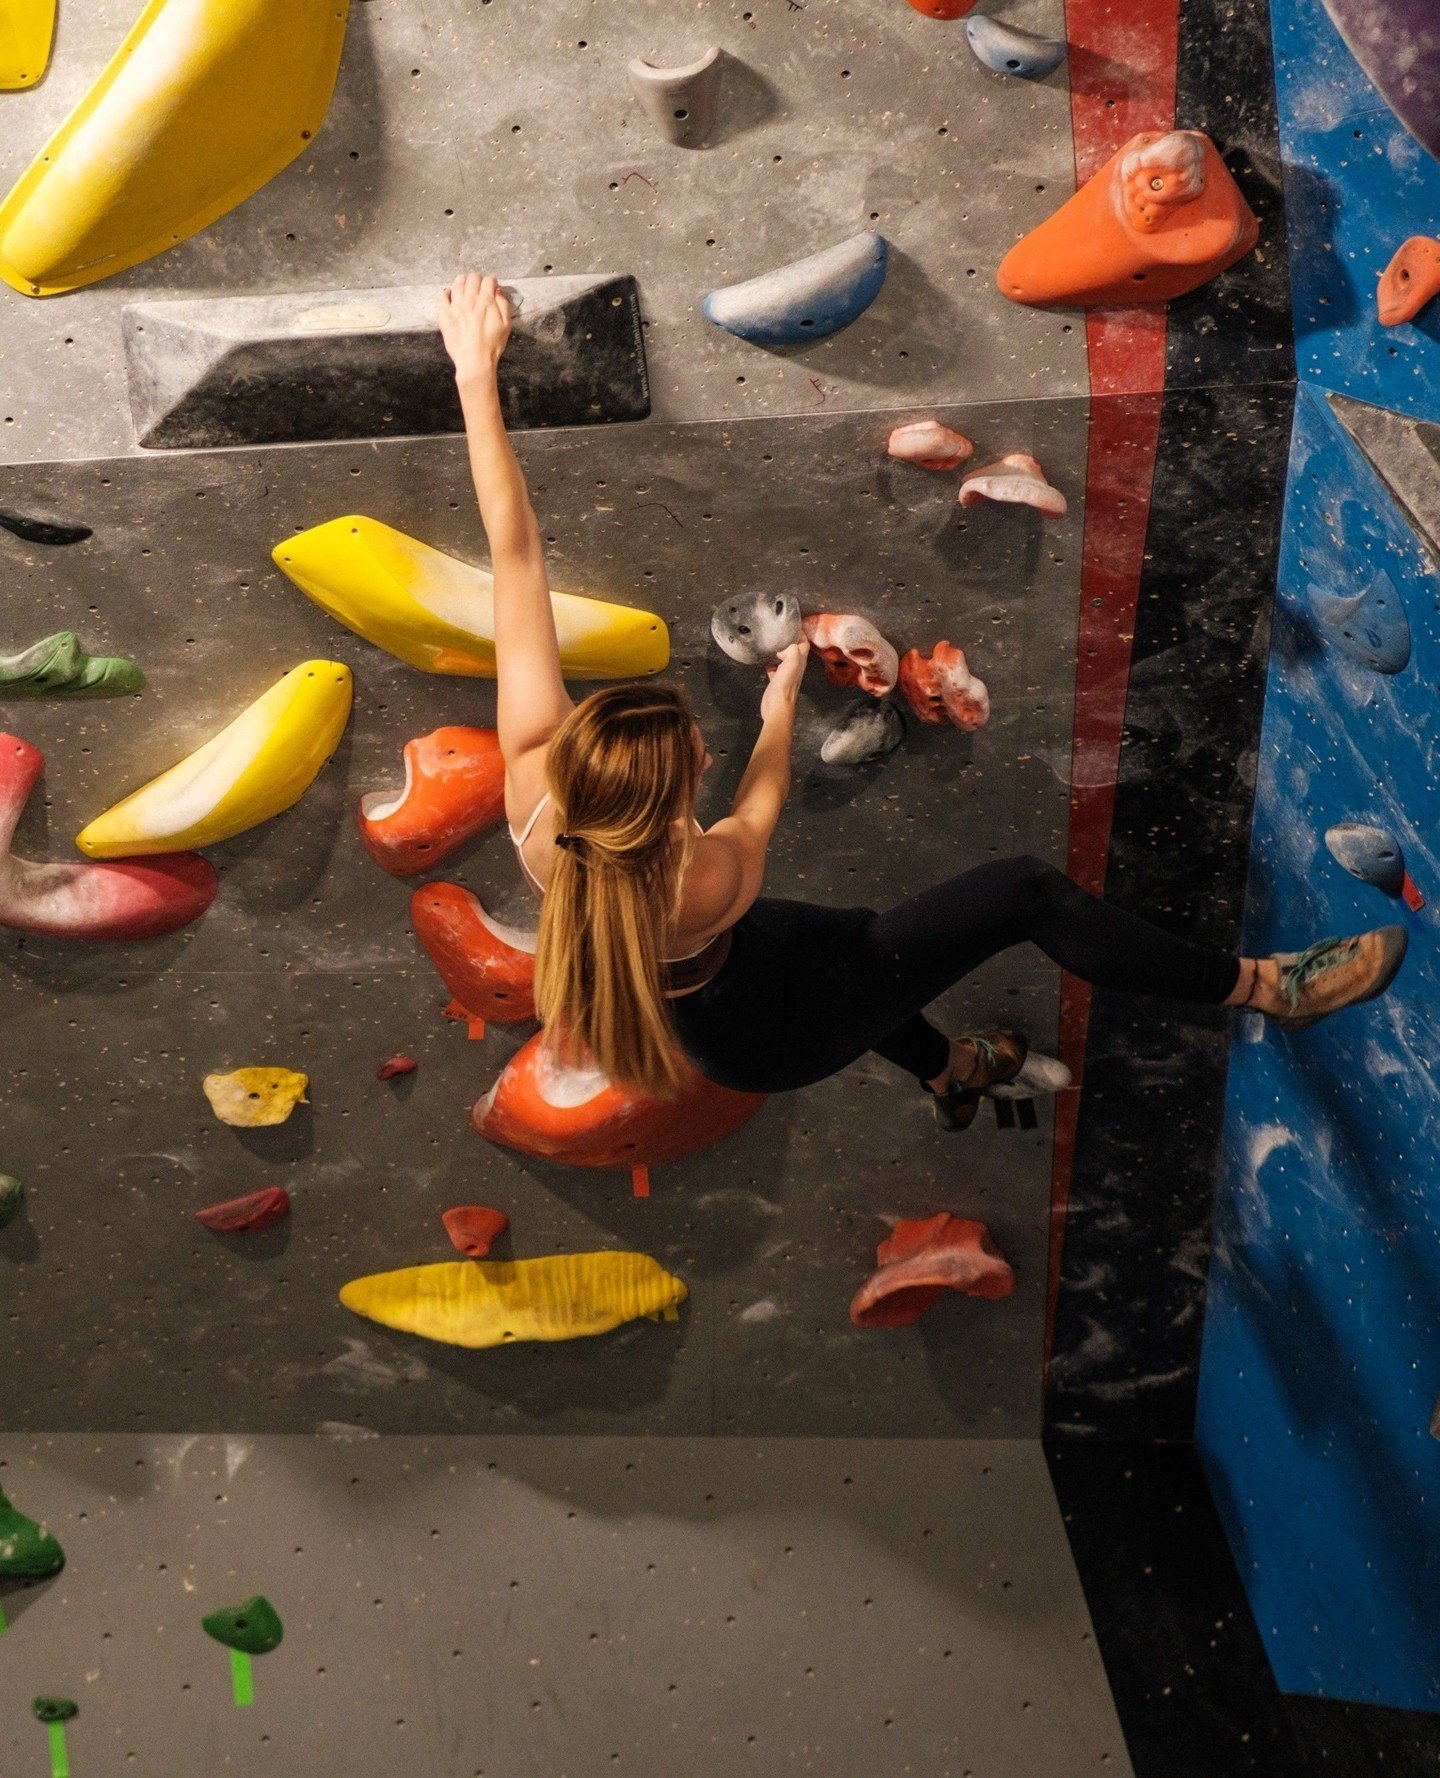 New discounts for you to come and climb!⁠
⁠
🪨First timer Tuesdays, $15 intro packages🪨⁠
⁠
Come in on Tuesday, and if it is your first time climbing at Boulders, pay only $15 for an intro pass (which includes rentals).⁠
⁠
🪨Teacher Thursdays, $15 in